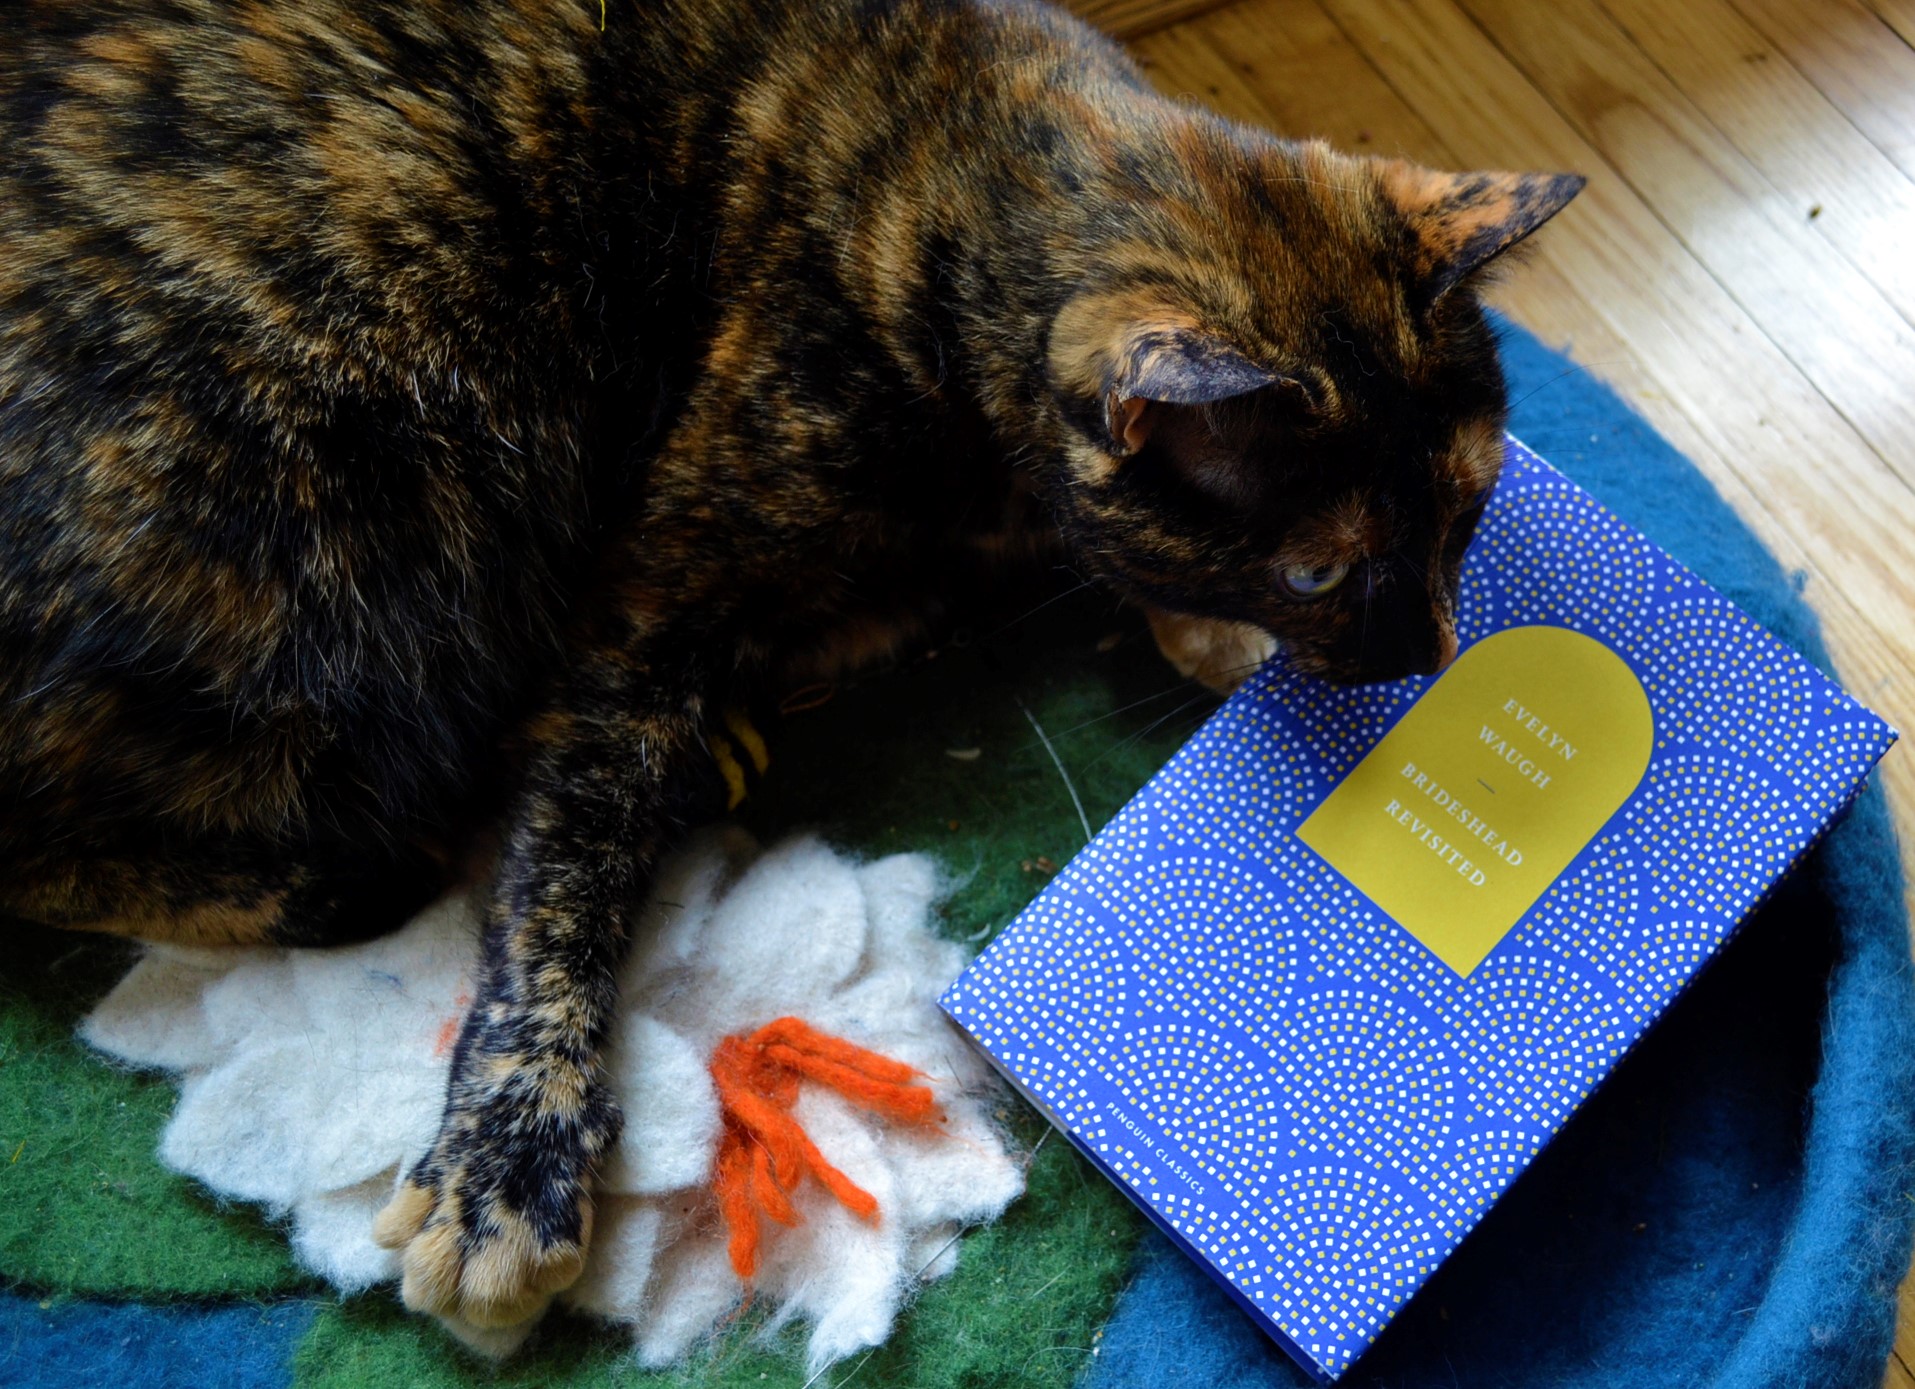 A tortoiseshell cat covers a bee toy with her paw as she suspiciously sniffs Brideshead Revisited.